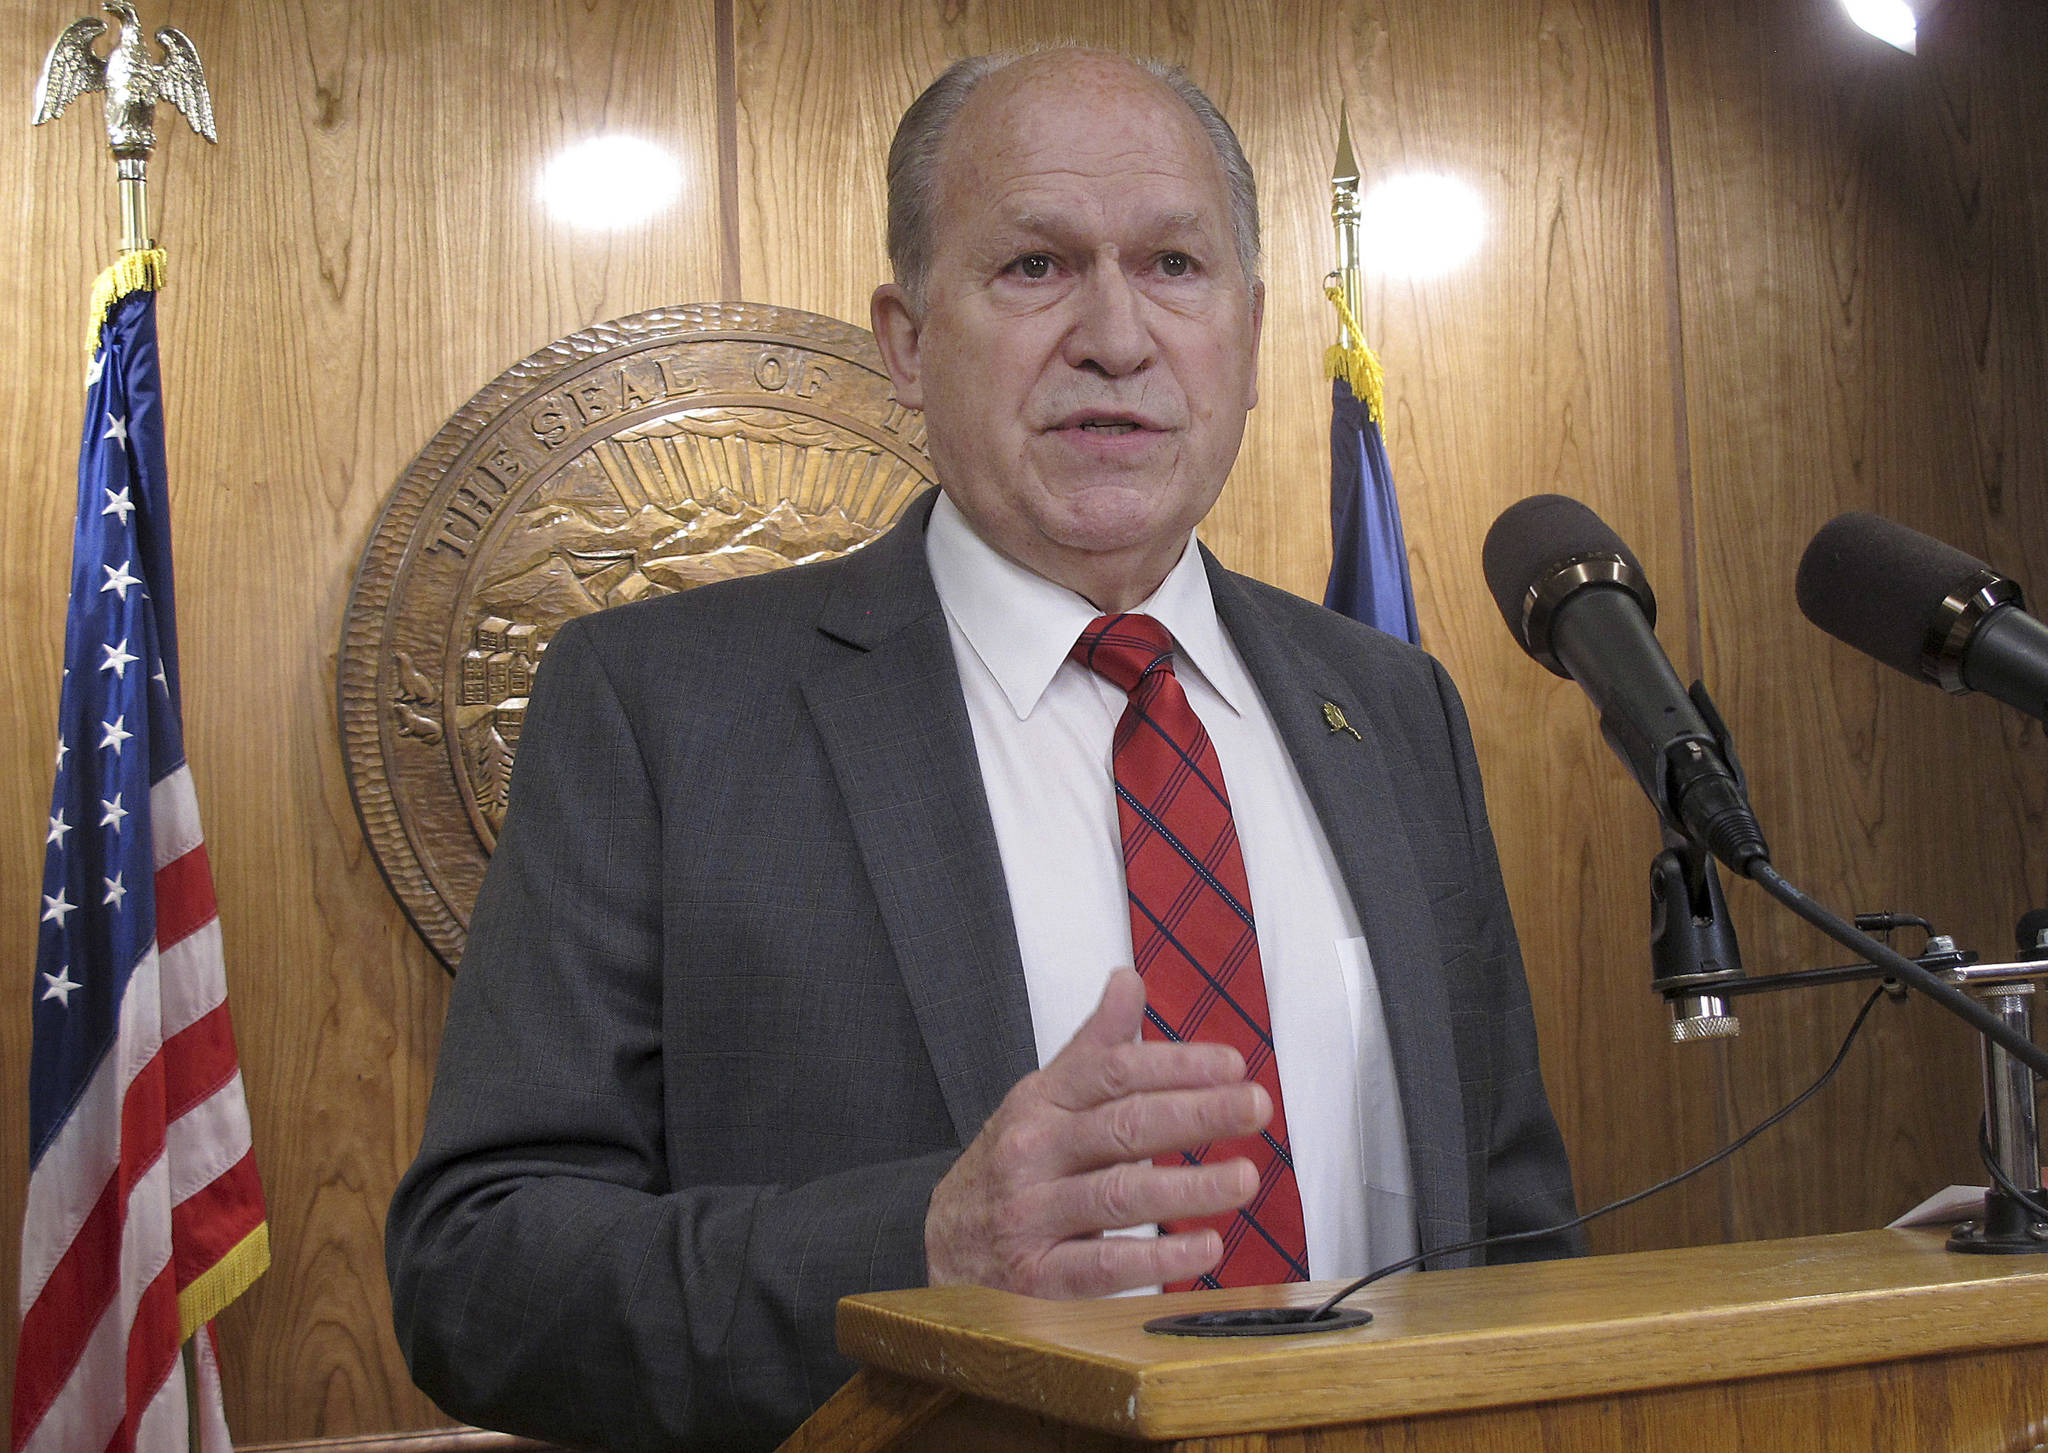 FILE - In this June 16, 2017, file photo Alaska Gov. Bill Walker speaks to reporters after calling a second special legislative session in Juneau, Alaska. Walker limited the session agenda to the state operating budget. Gov. Walker will propose a head tax on Alaskans to partially fill the multi-billion dollar gap between state revenue and spending. The governor, an independent, at special legislative session next month will propose a 1.5 percent flat tax on wages or self-employment income. (AP Photo/Becky Bohrer, File)